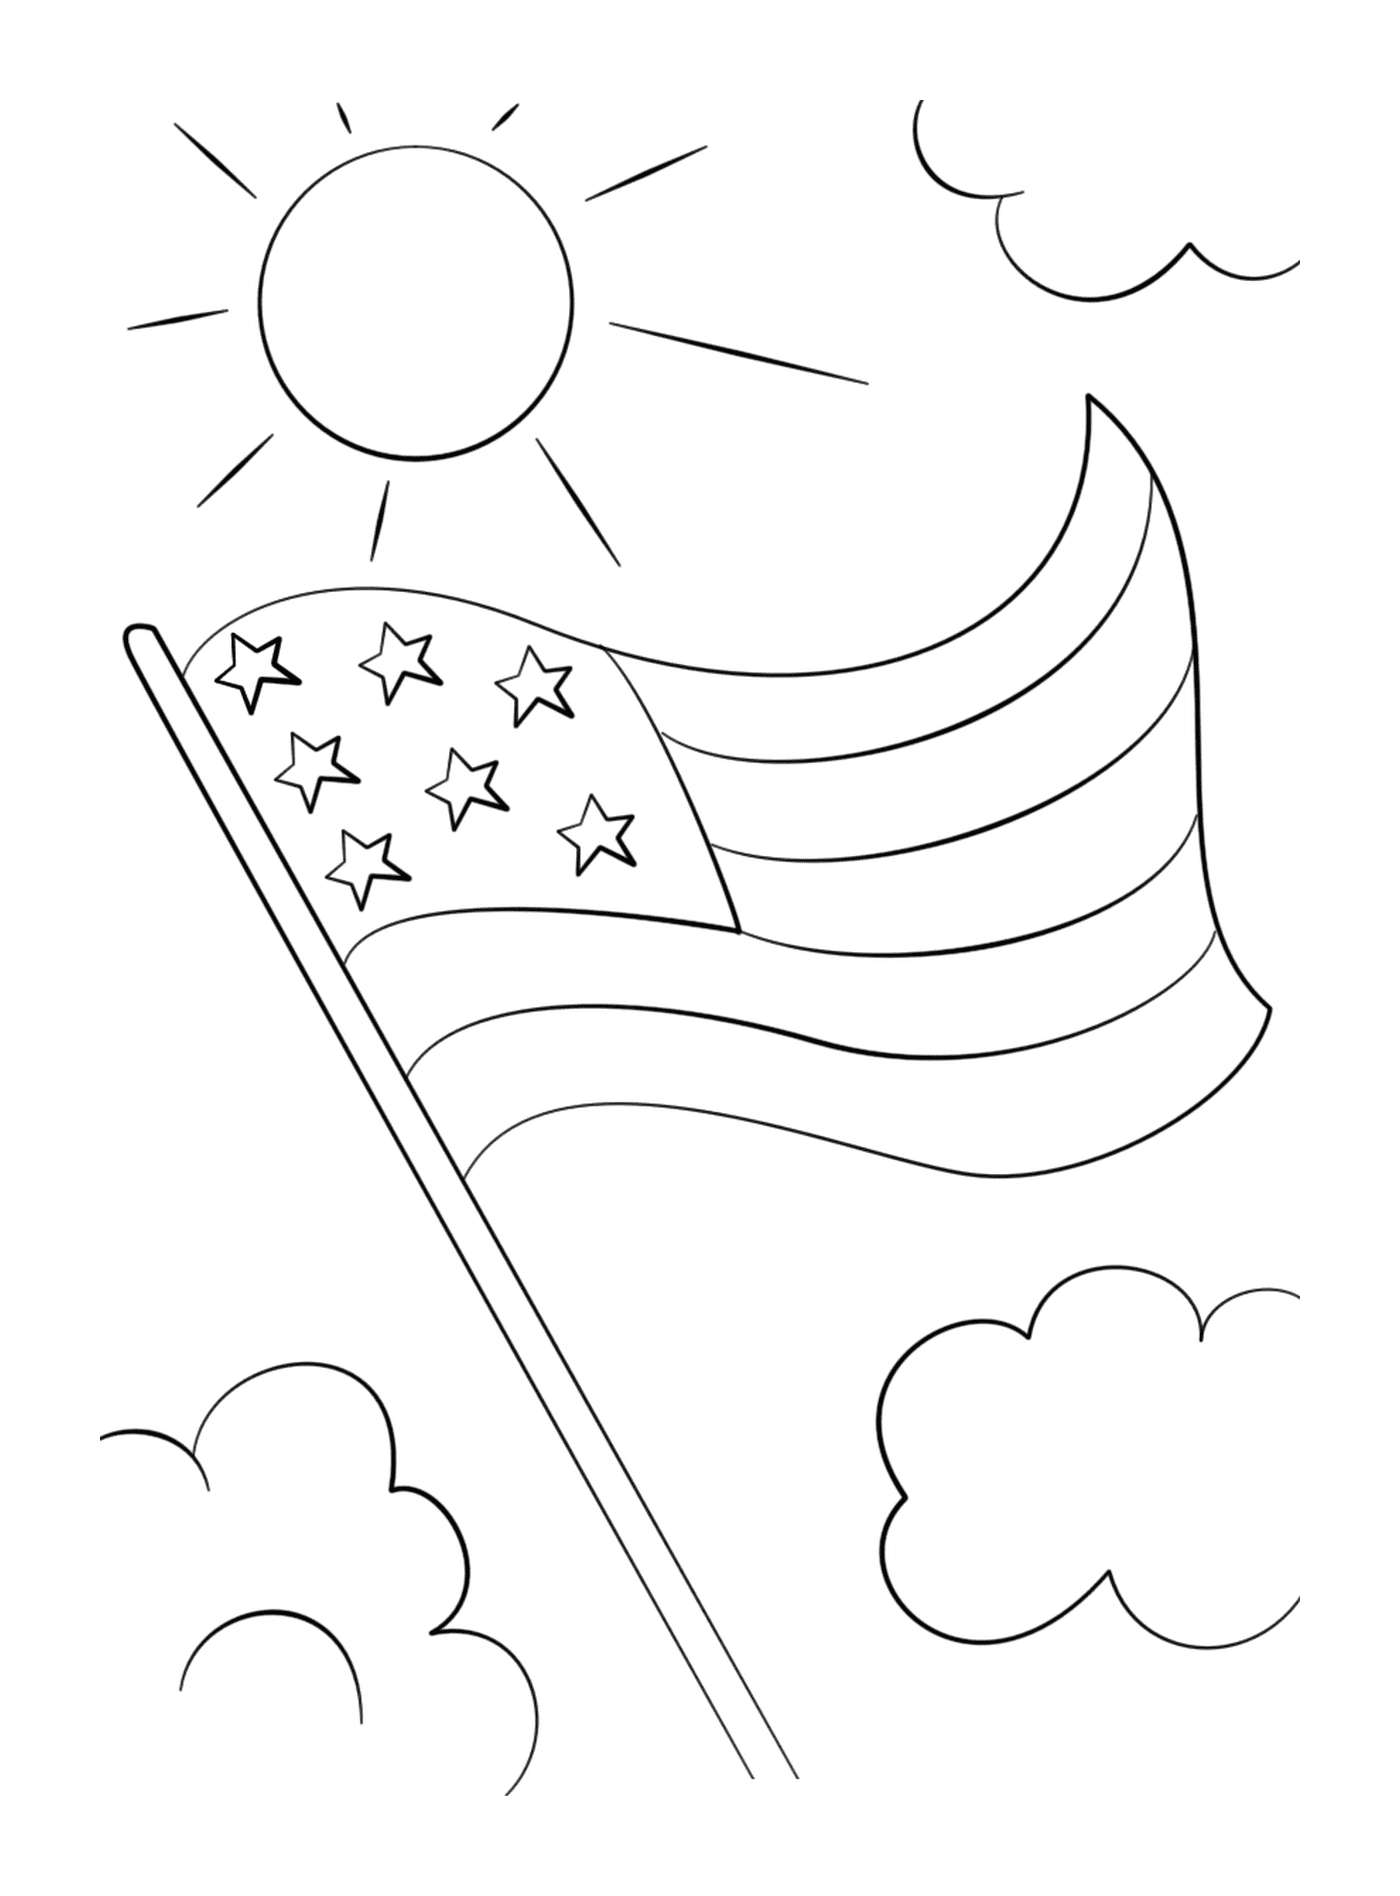  American flag with stars floating in the sky 